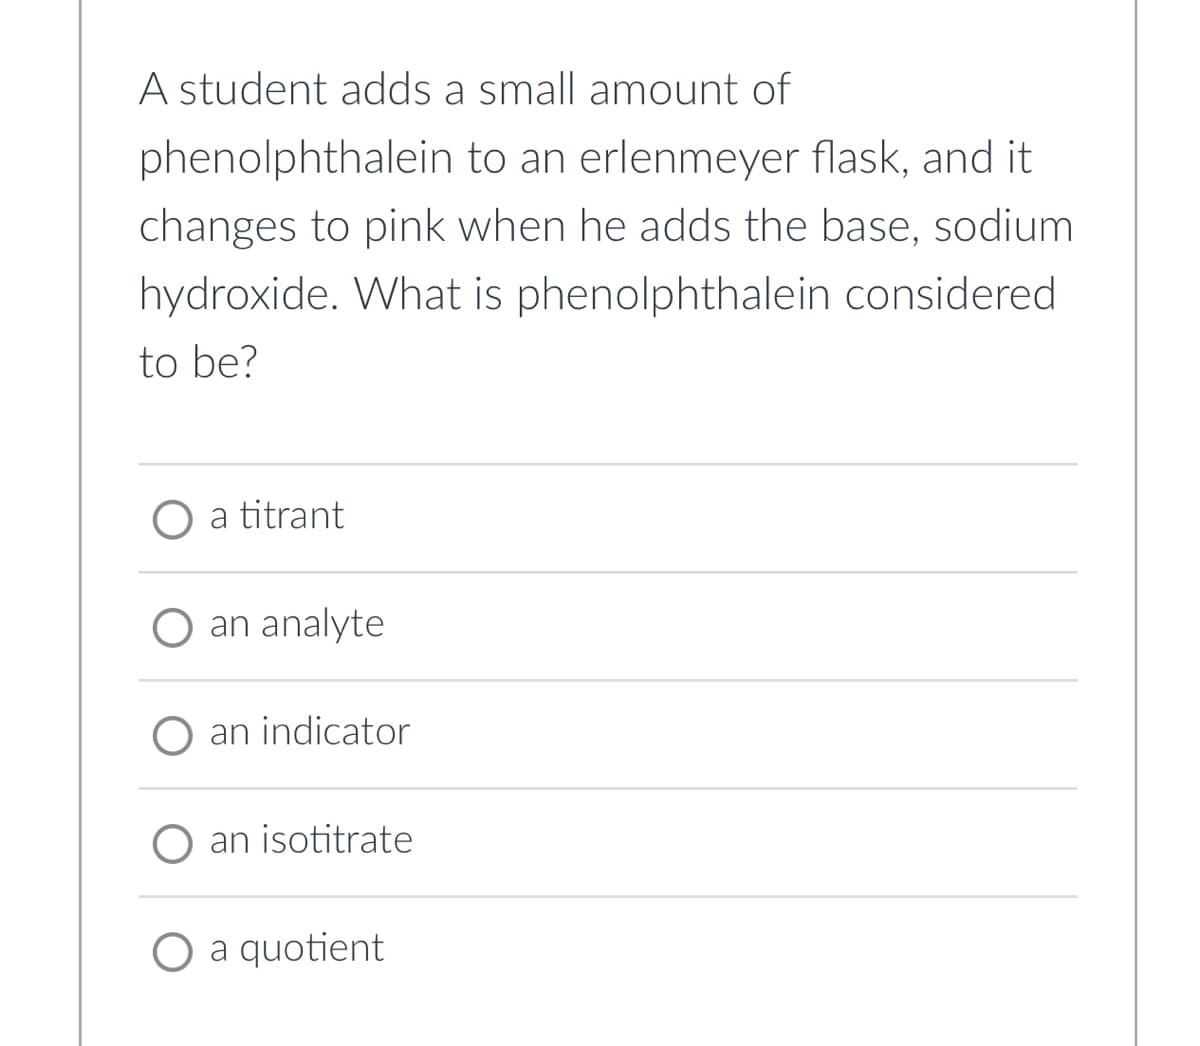 A student adds a small amount of
phenolphthalein
to an erlenmeyer flask, and it
changes to pink when he adds the base, sodium
hydroxide. What is phenolphthalein considered.
to be?
O a titrant
O an analyte
an indicator
an isotitrate
O a quotient